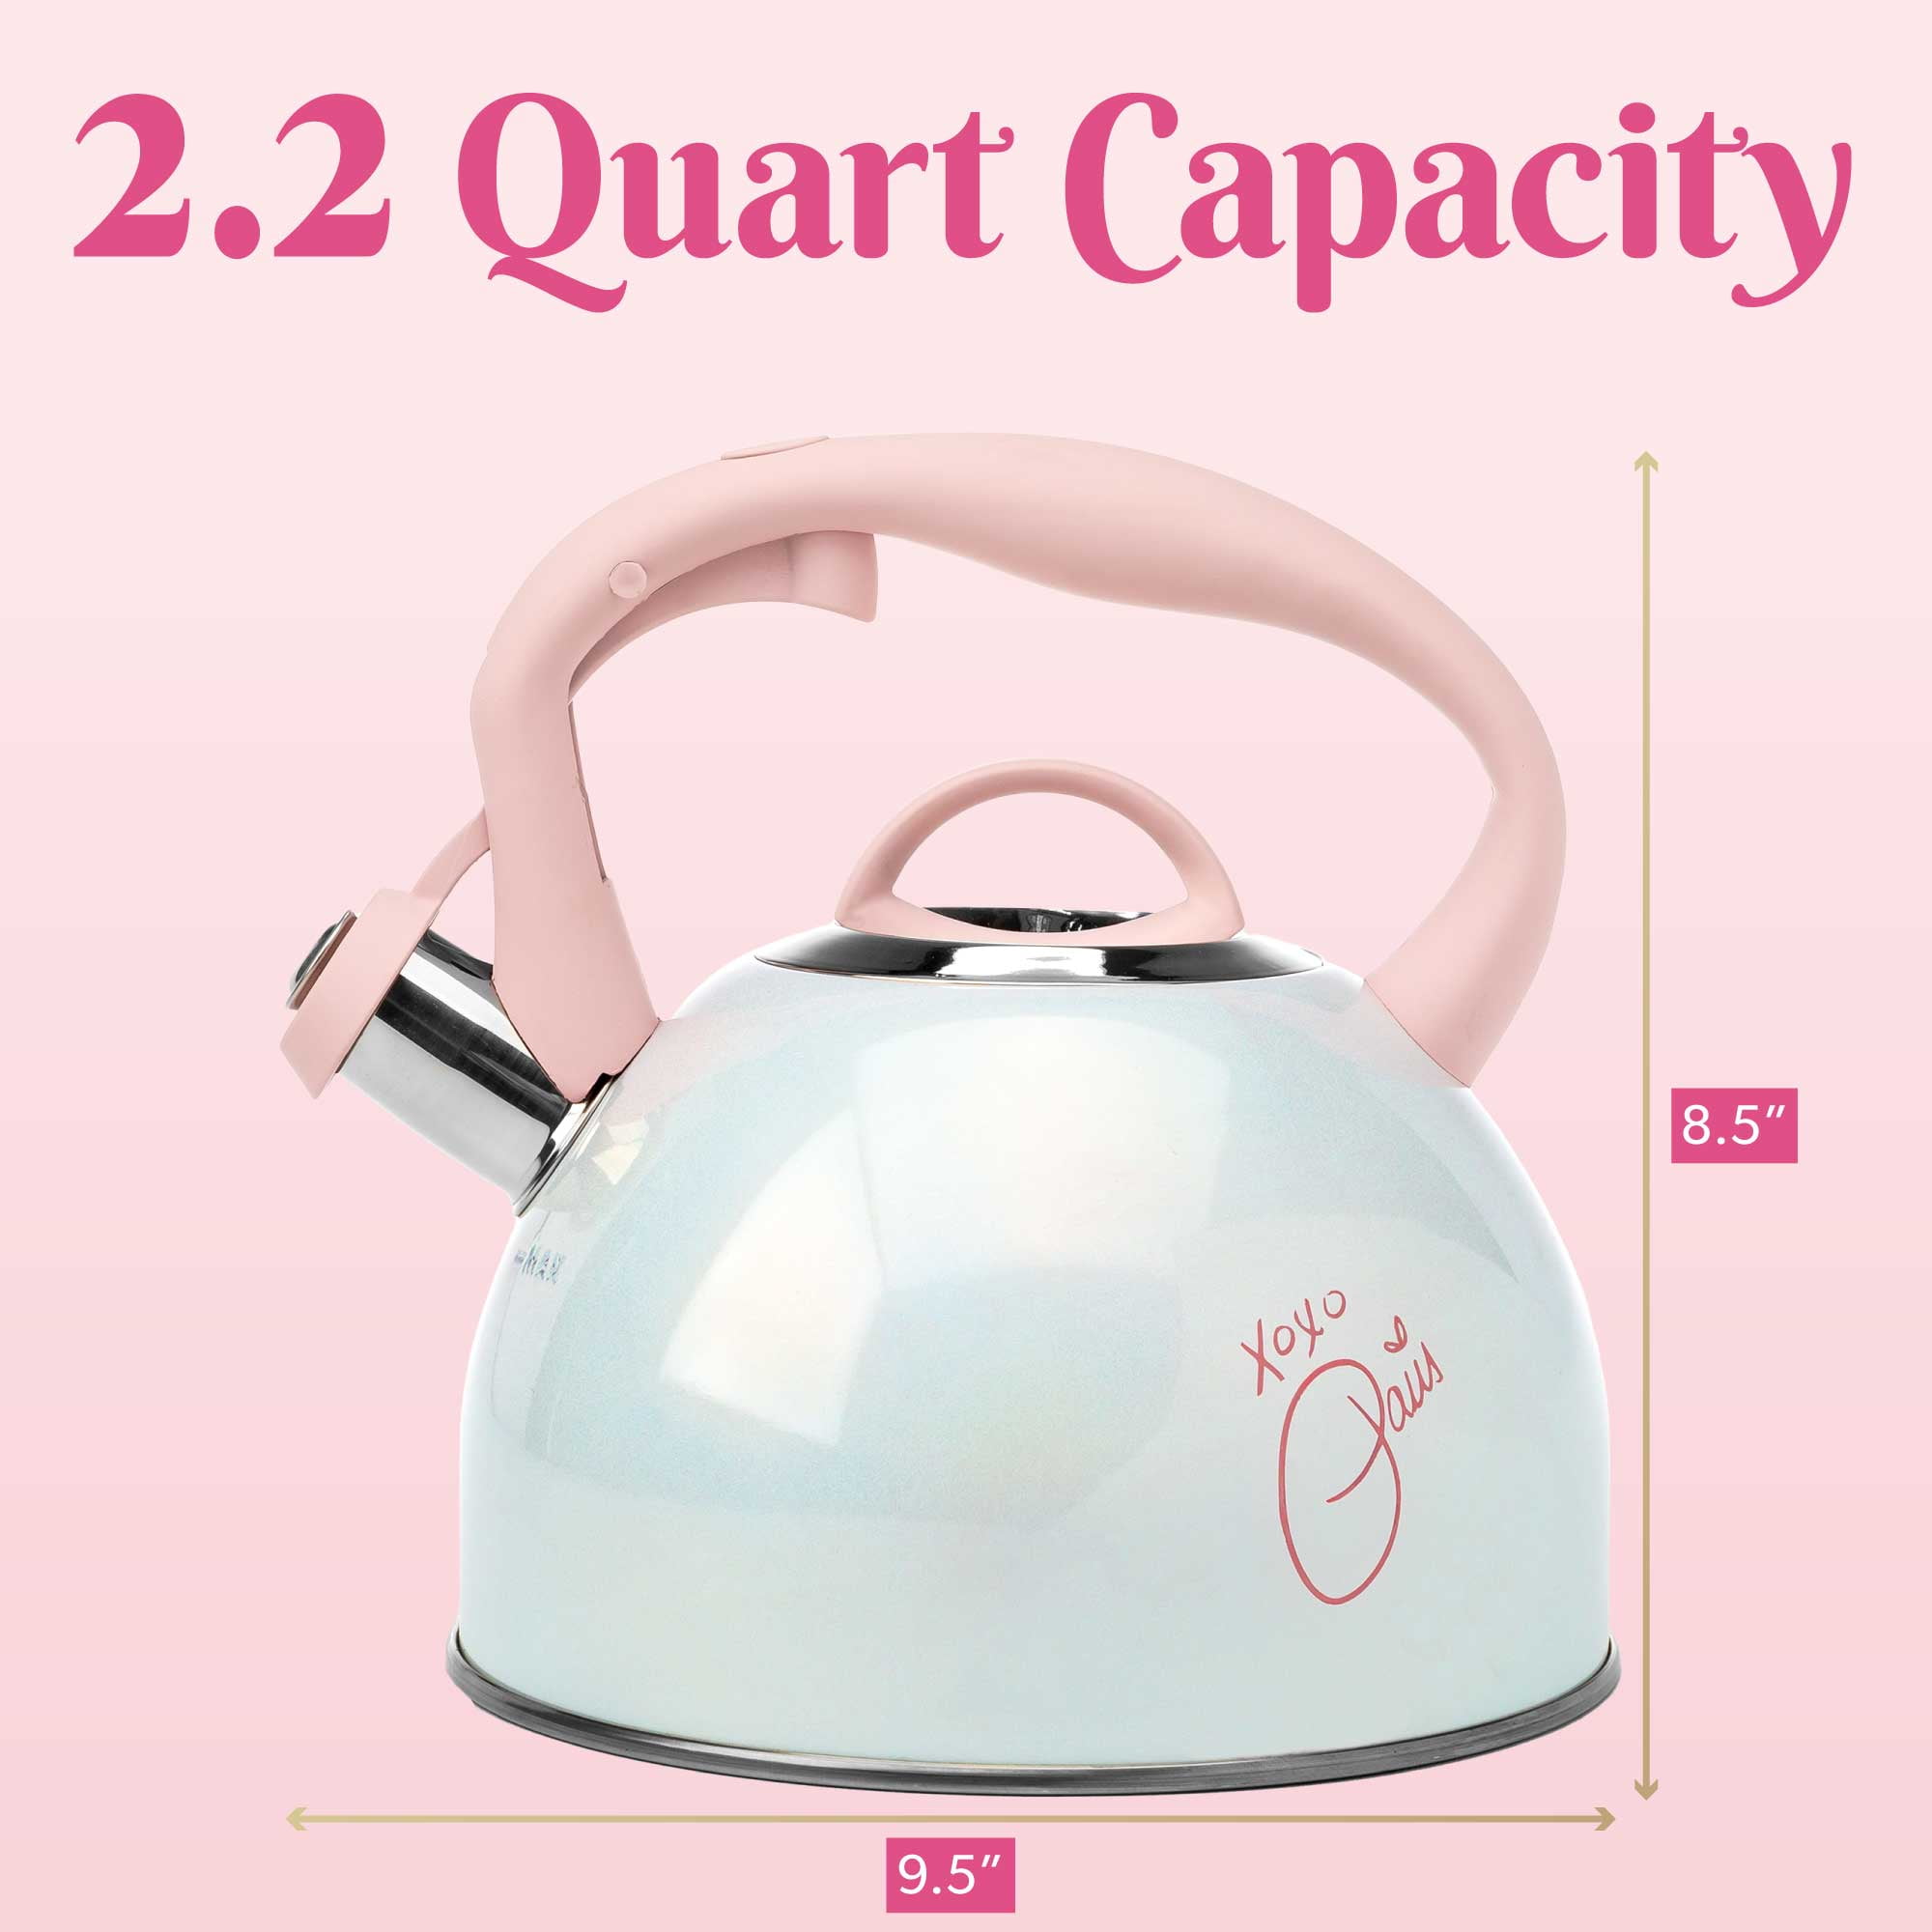 Paris Hilton Whistling Stovetop Tea Kettle, Stainless Steel with Color Changing That's Hot Heat Indicator Design, Soft Touch Handle, 2.5-Quart, Pink